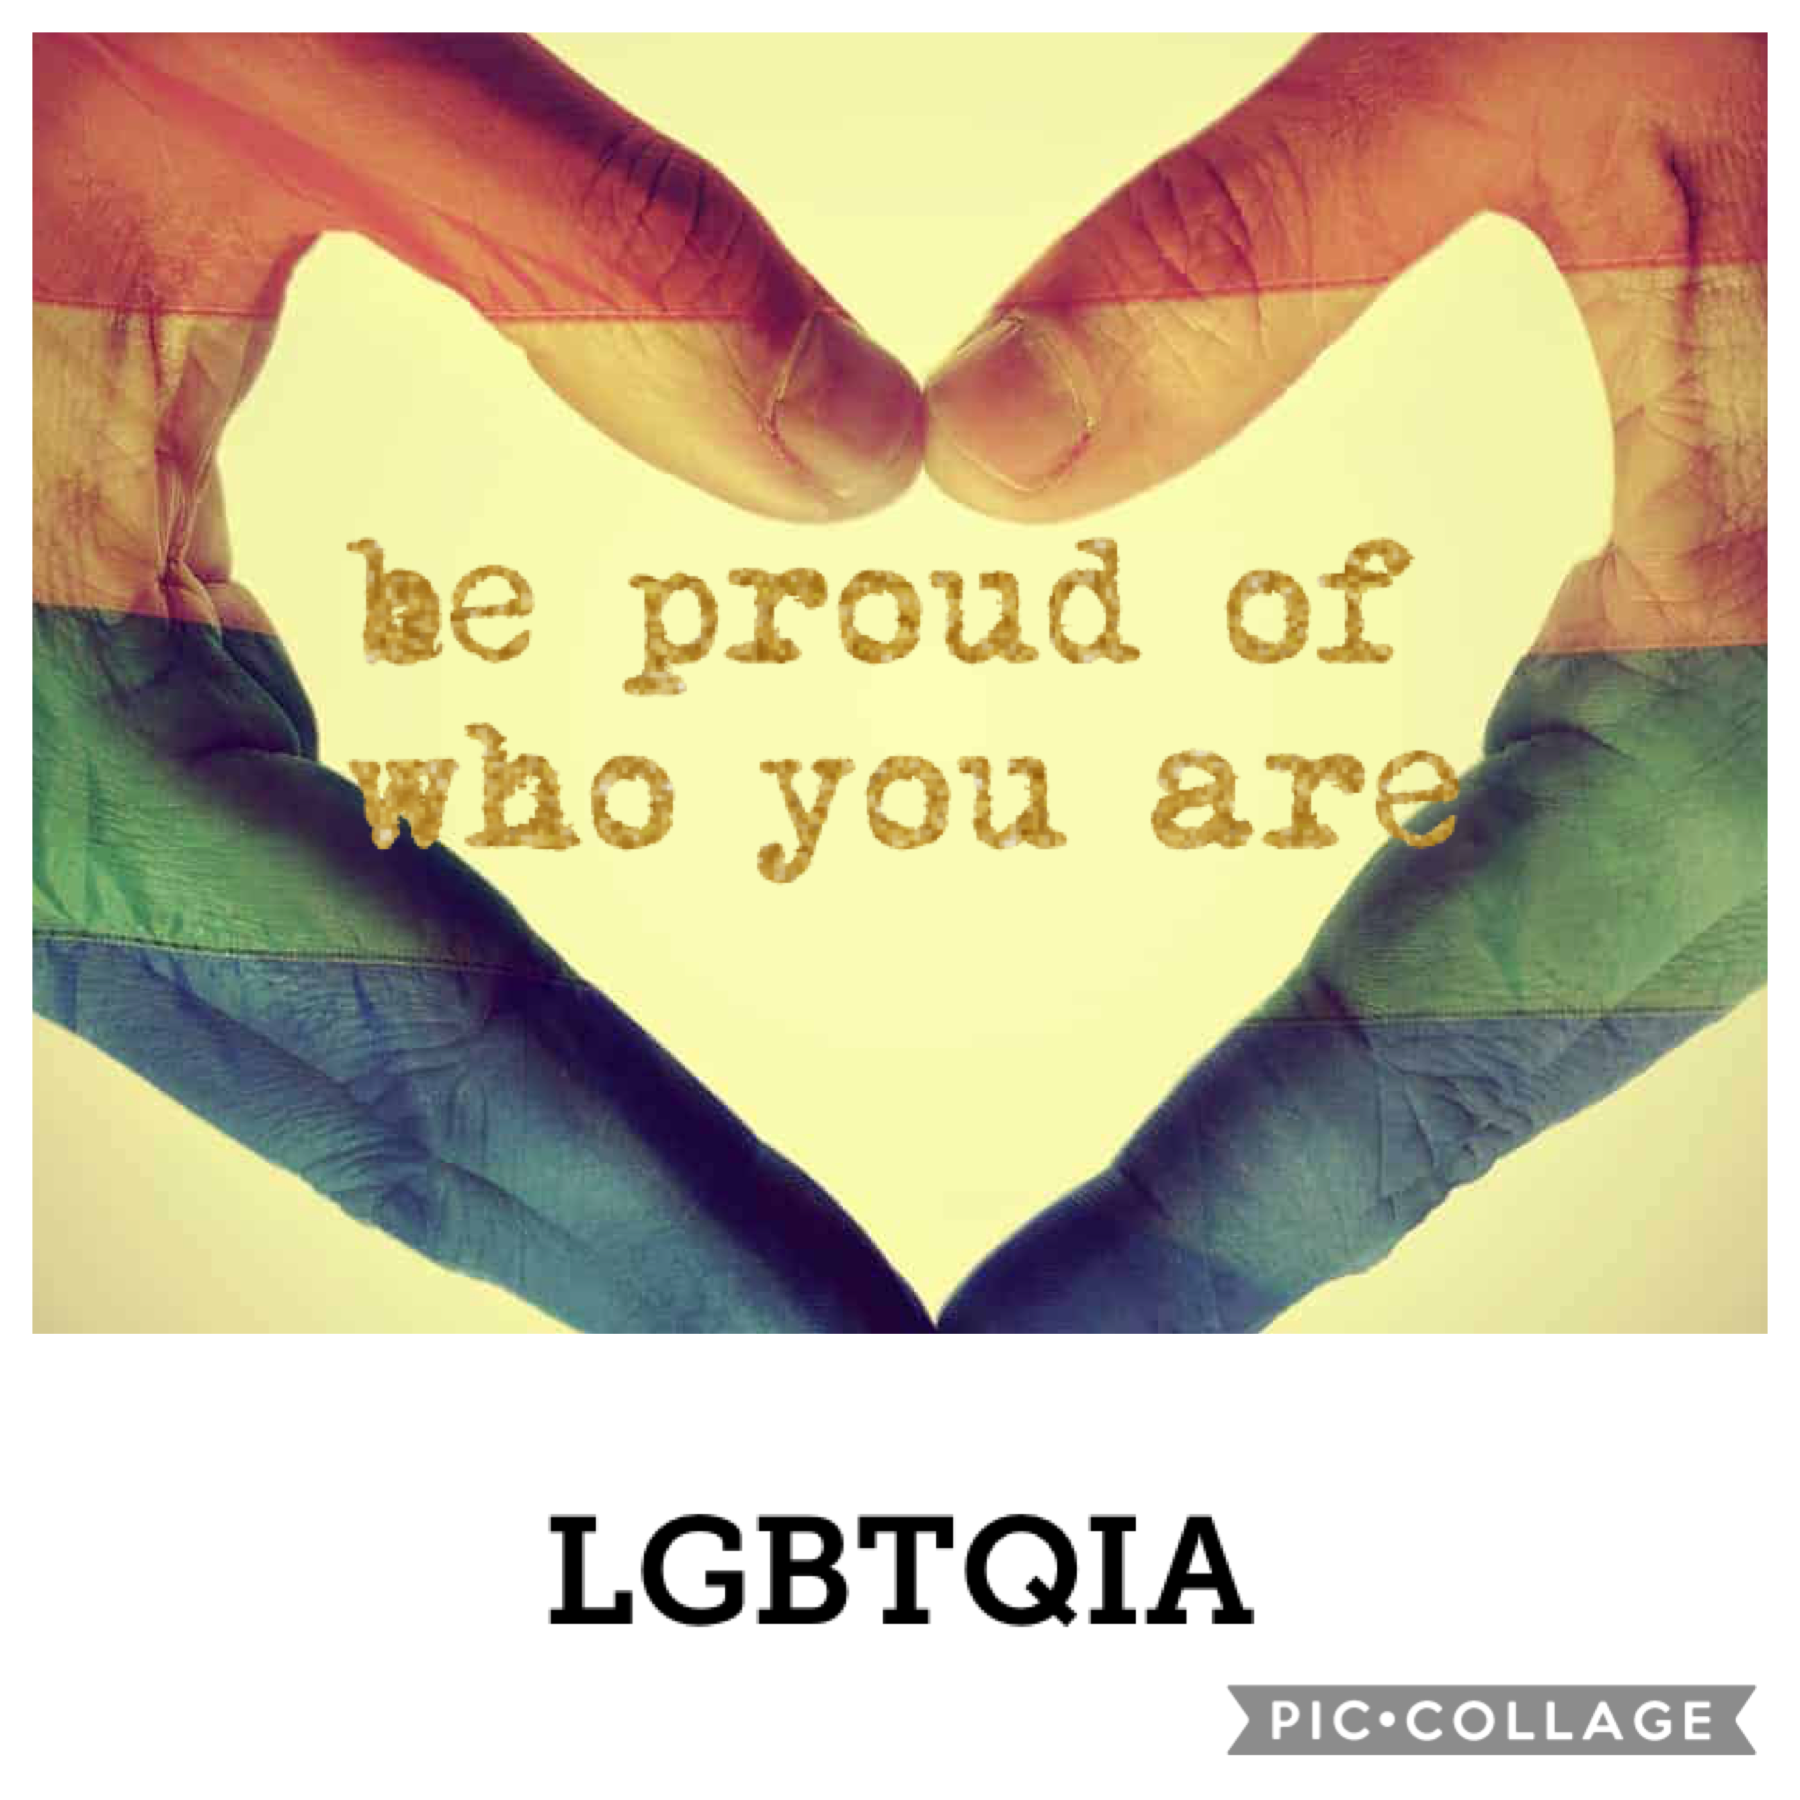 happy pride month!! just be yourself and that’s all that matters. the world is changing. ALL LGBTQIA LIVES MATTER